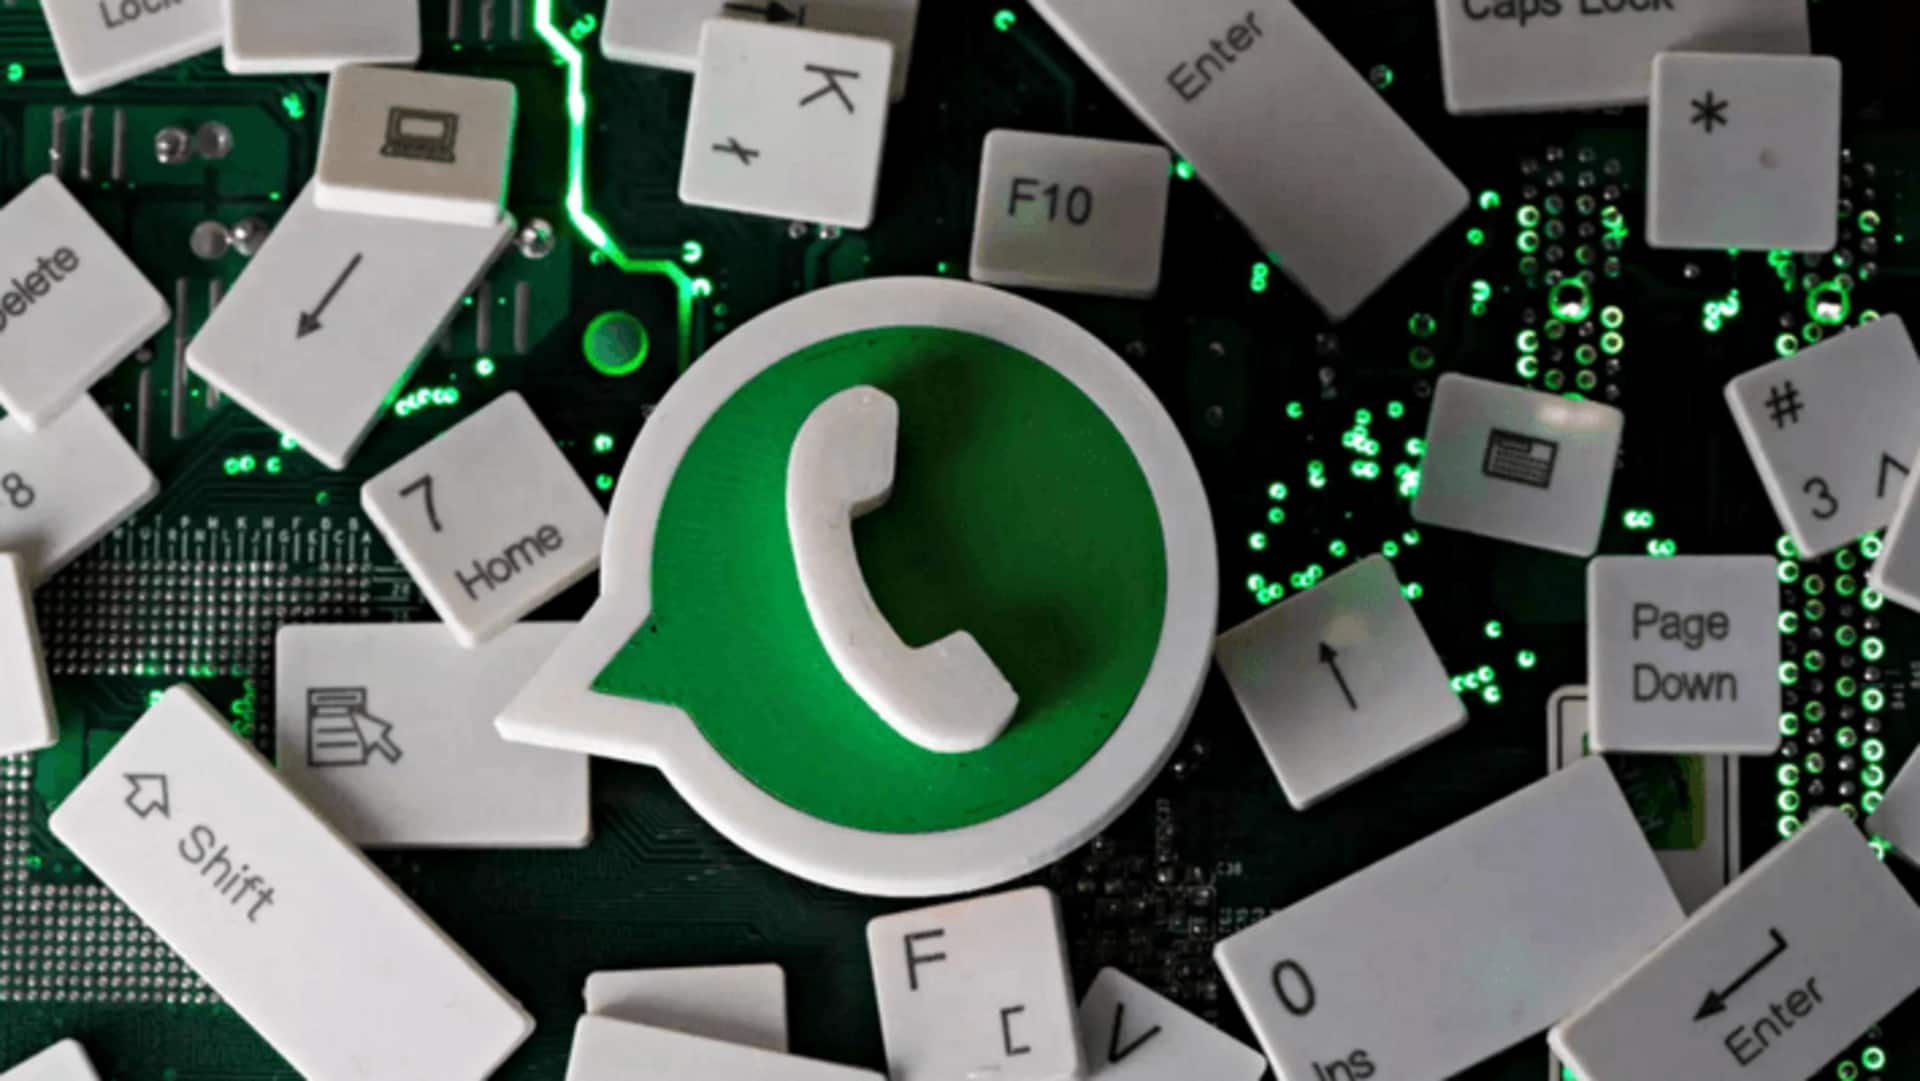 WhatsApp releases new voice status feature for Android beta users